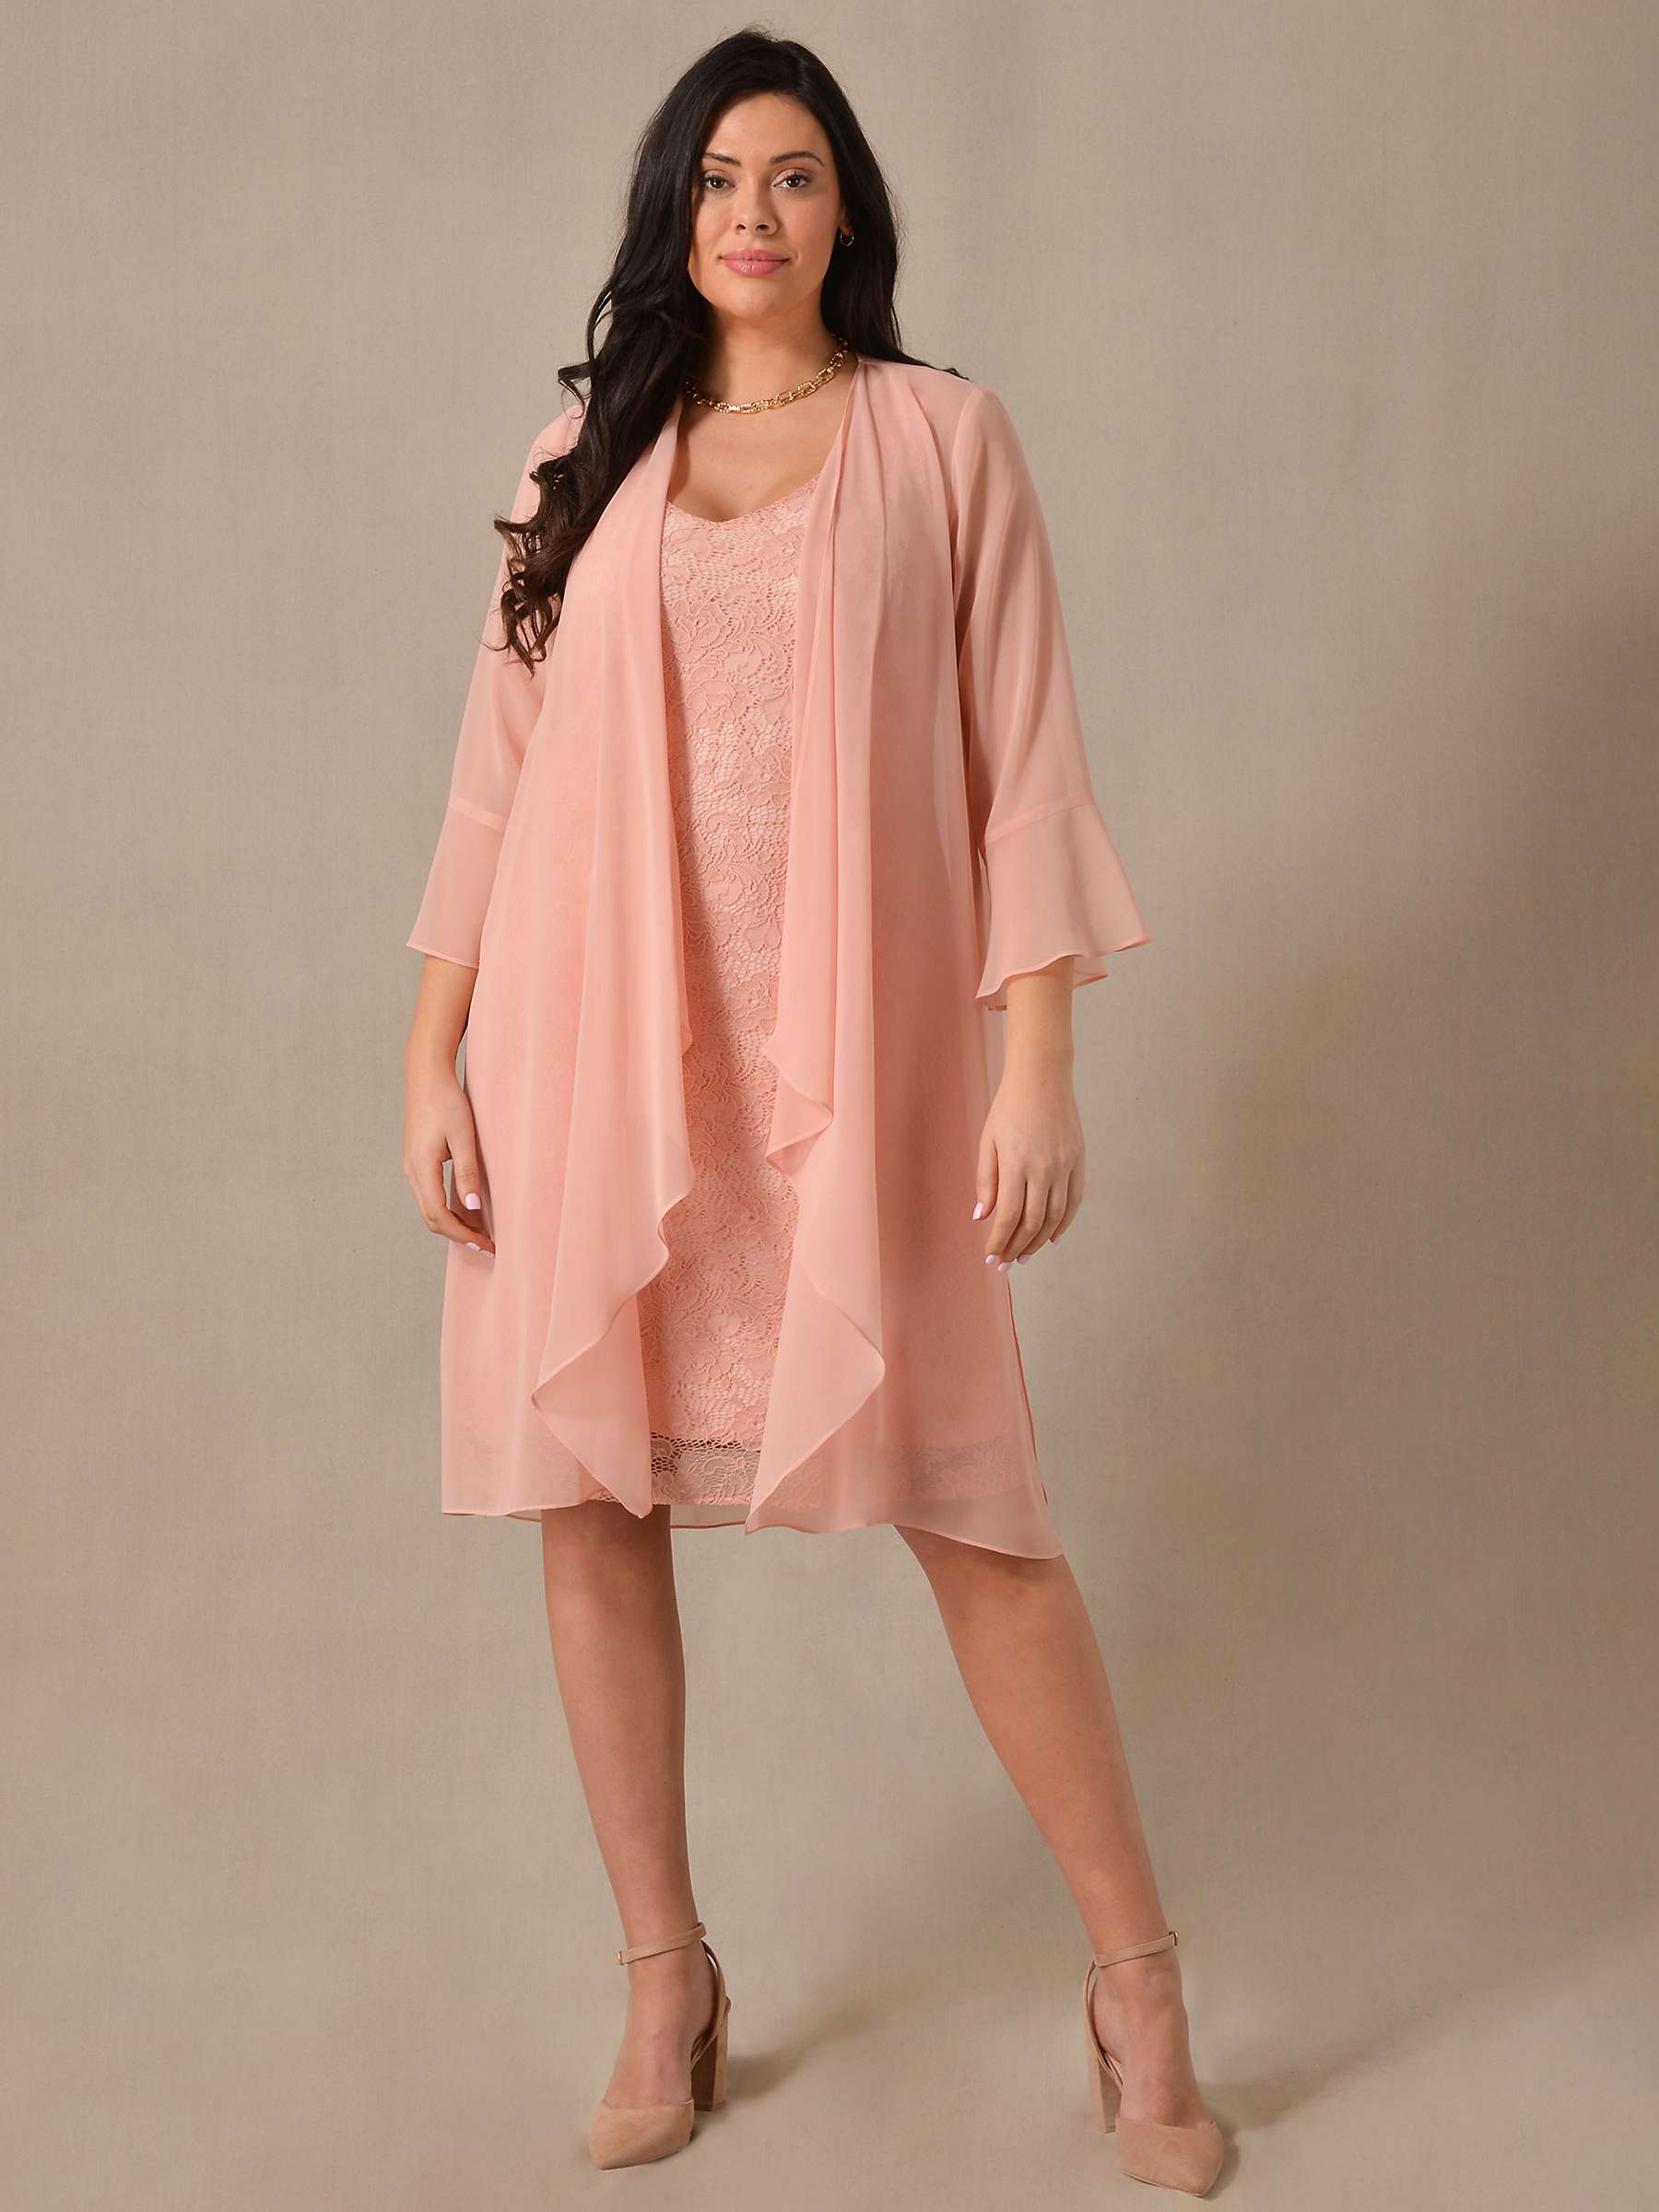 Buy Live Unlimited Waterfall Jacket Lace Dress Set,  Pink Online at johnlewis.com